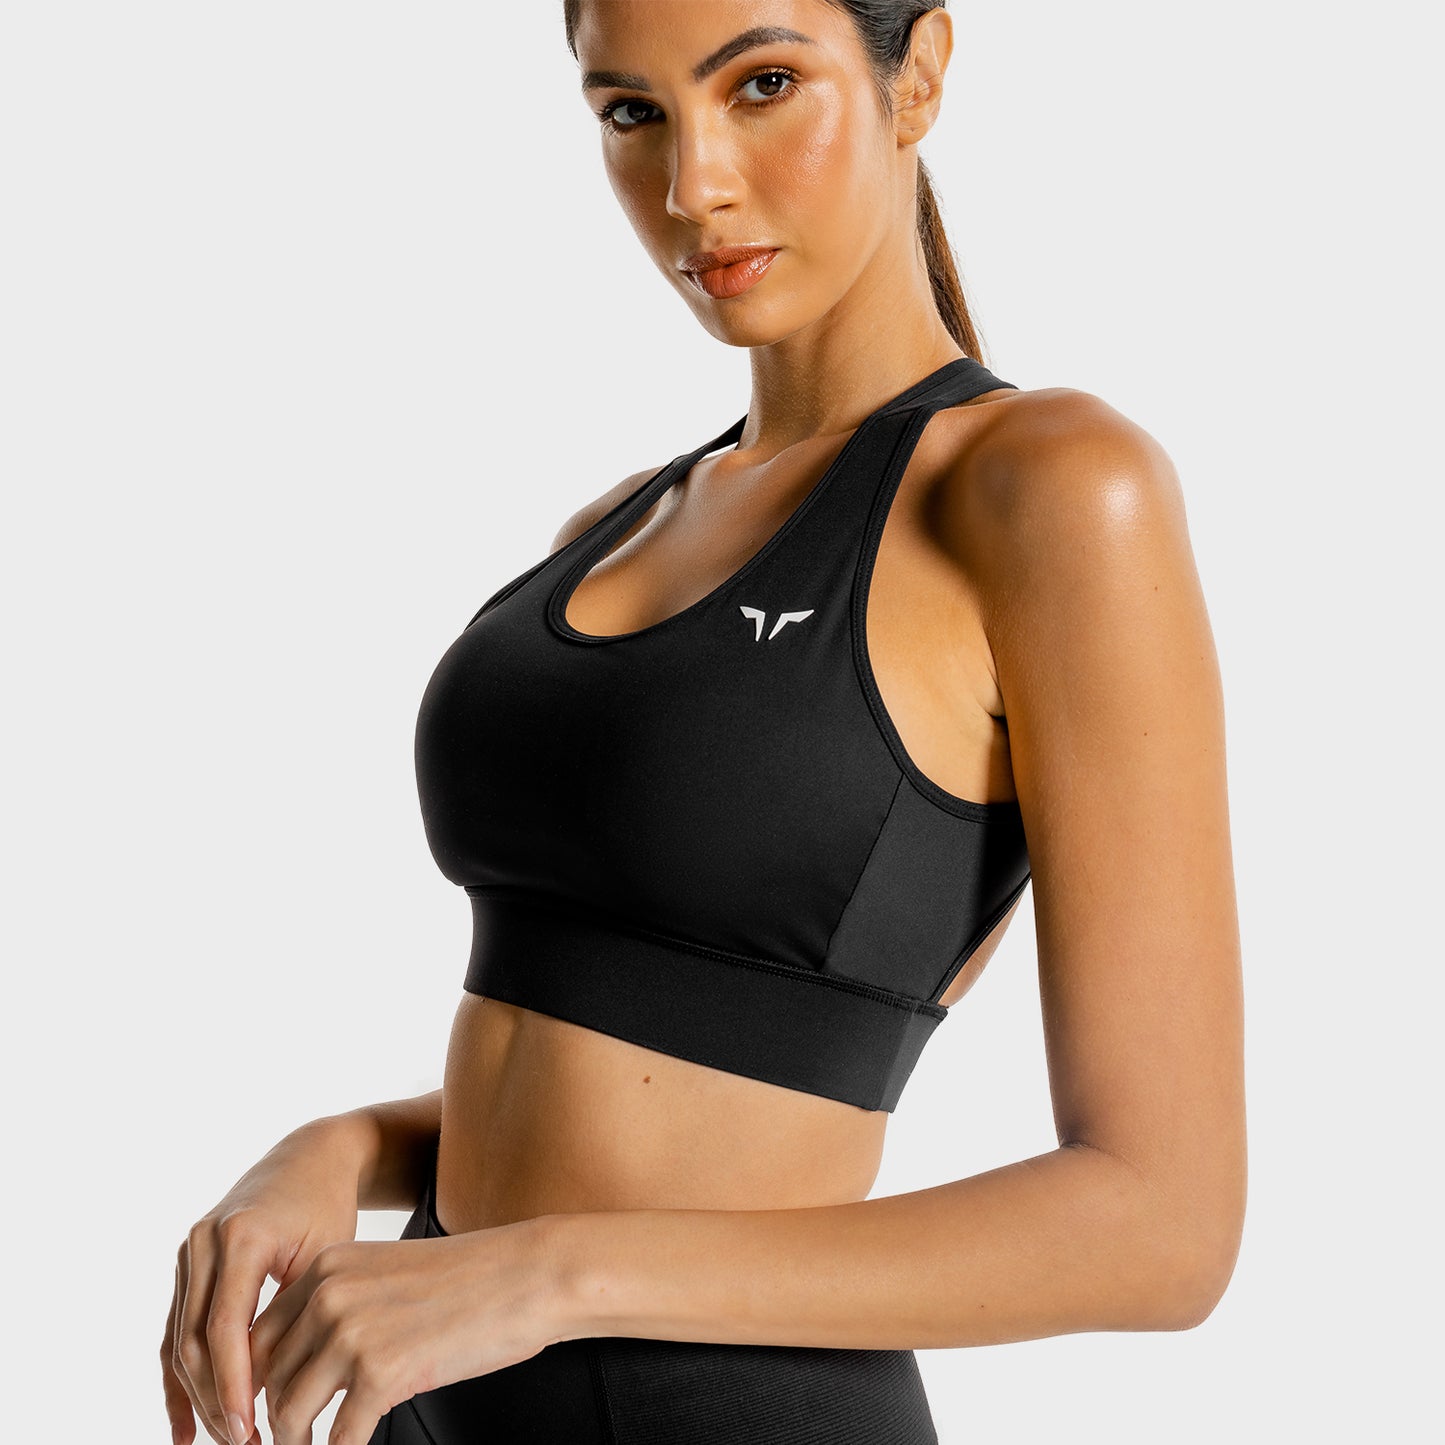 squatwolf-workout-clothes-core-bra-black-sports-bra-for-gym